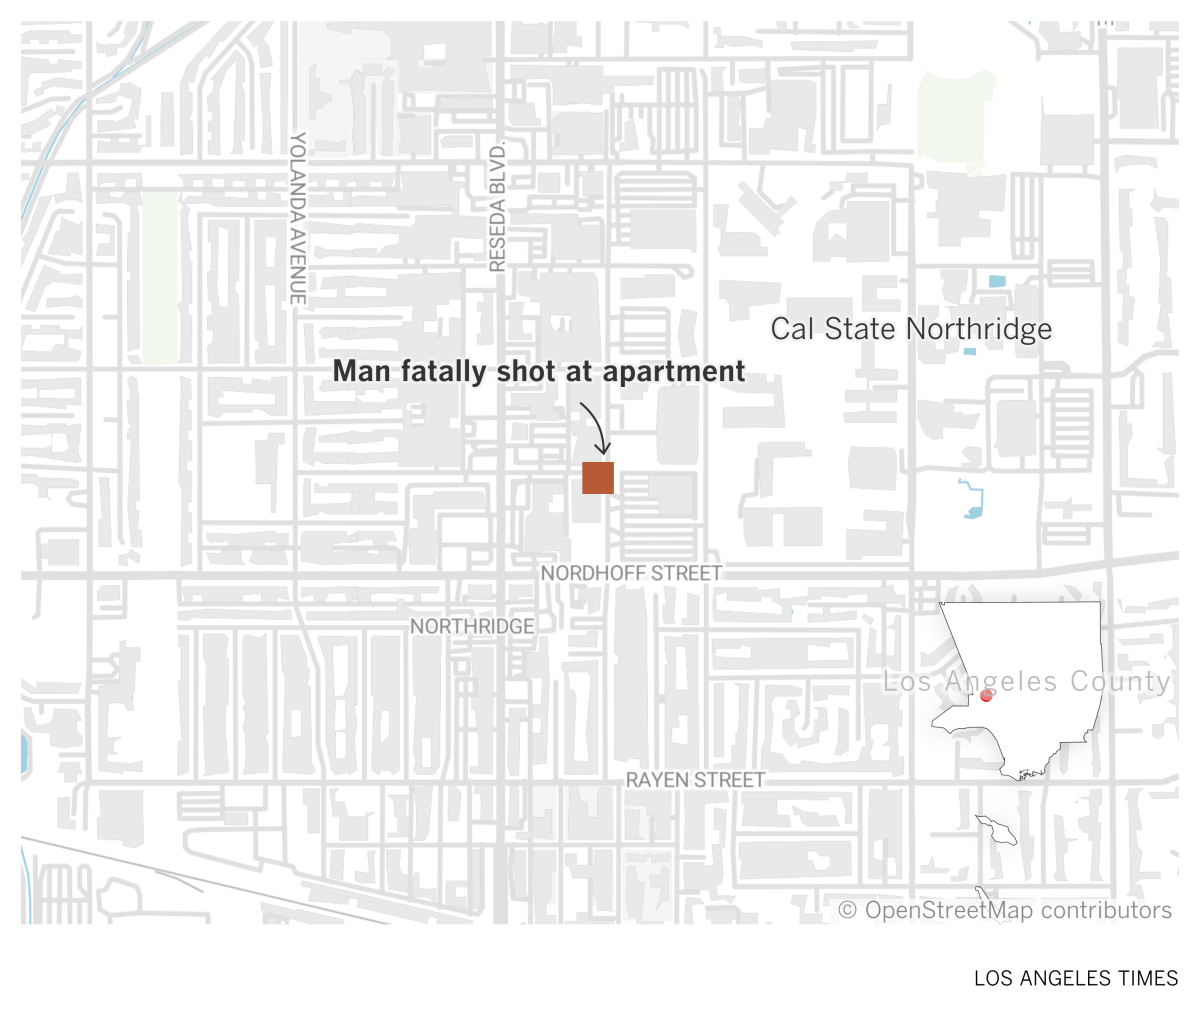 A map showing the location where a man was shot and killed in his apartment in Northridge